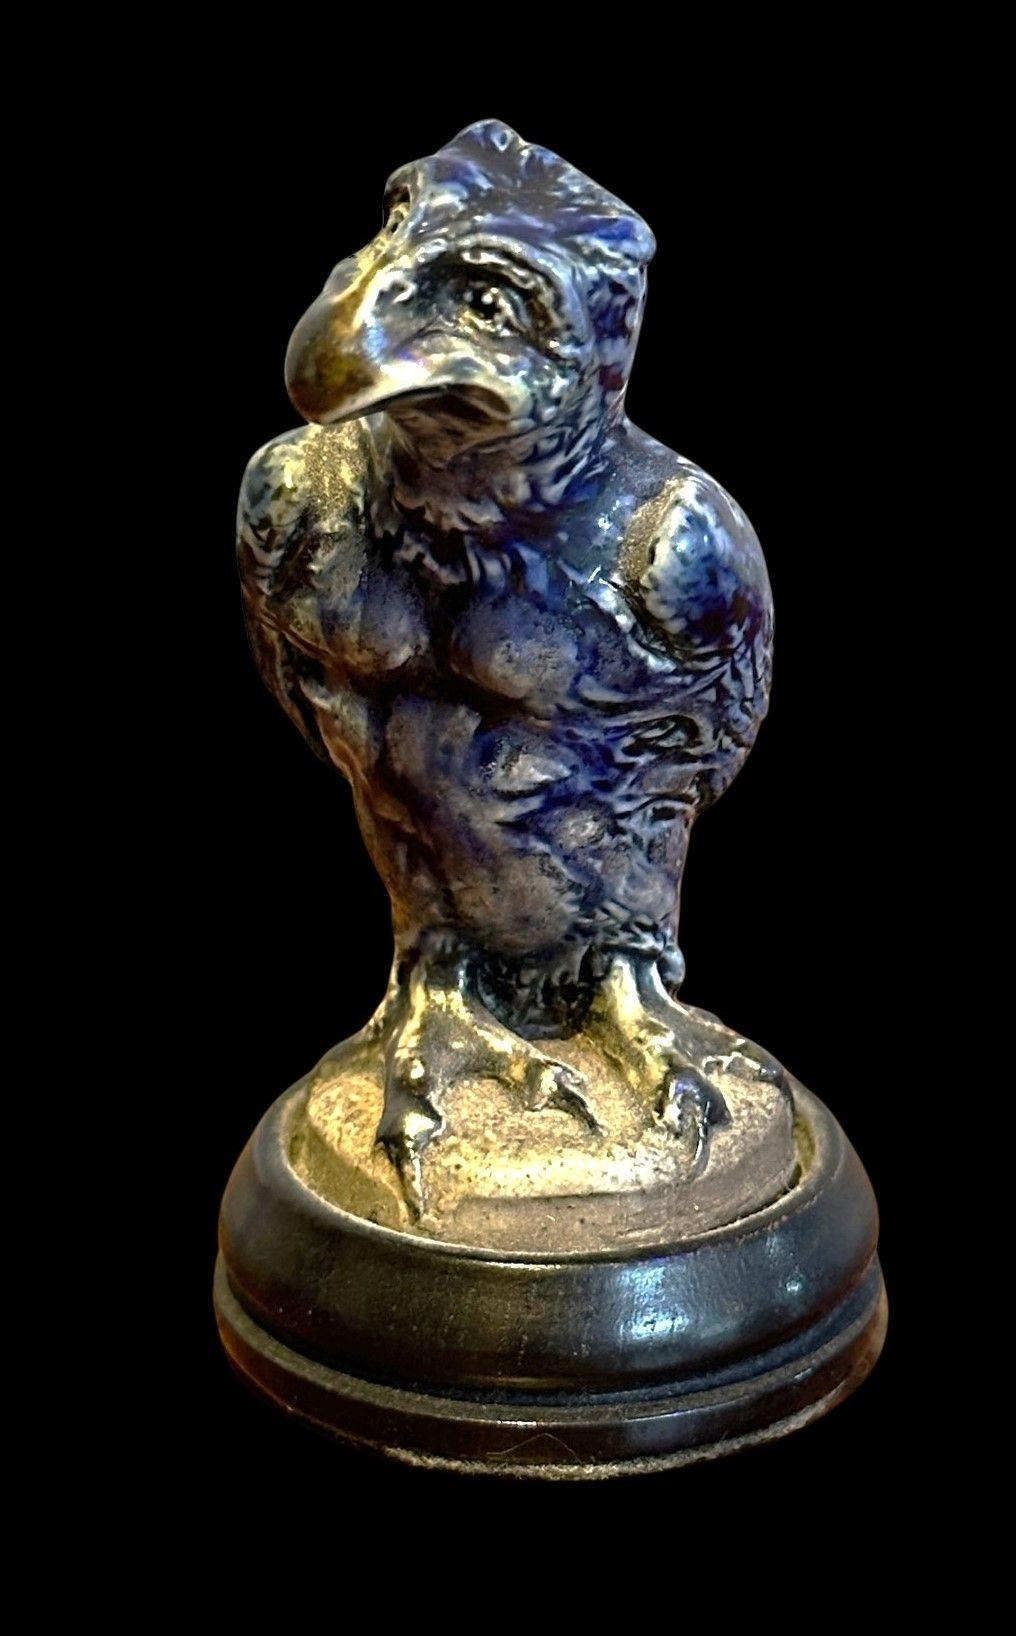 5462
Rare Martin Brothers Miniature Bird by Robert Wallace Martin.
The Cobalt Glazed Bird stands with wings tucked in and a quizzical / curious expression.
8cm high, Dated 1913